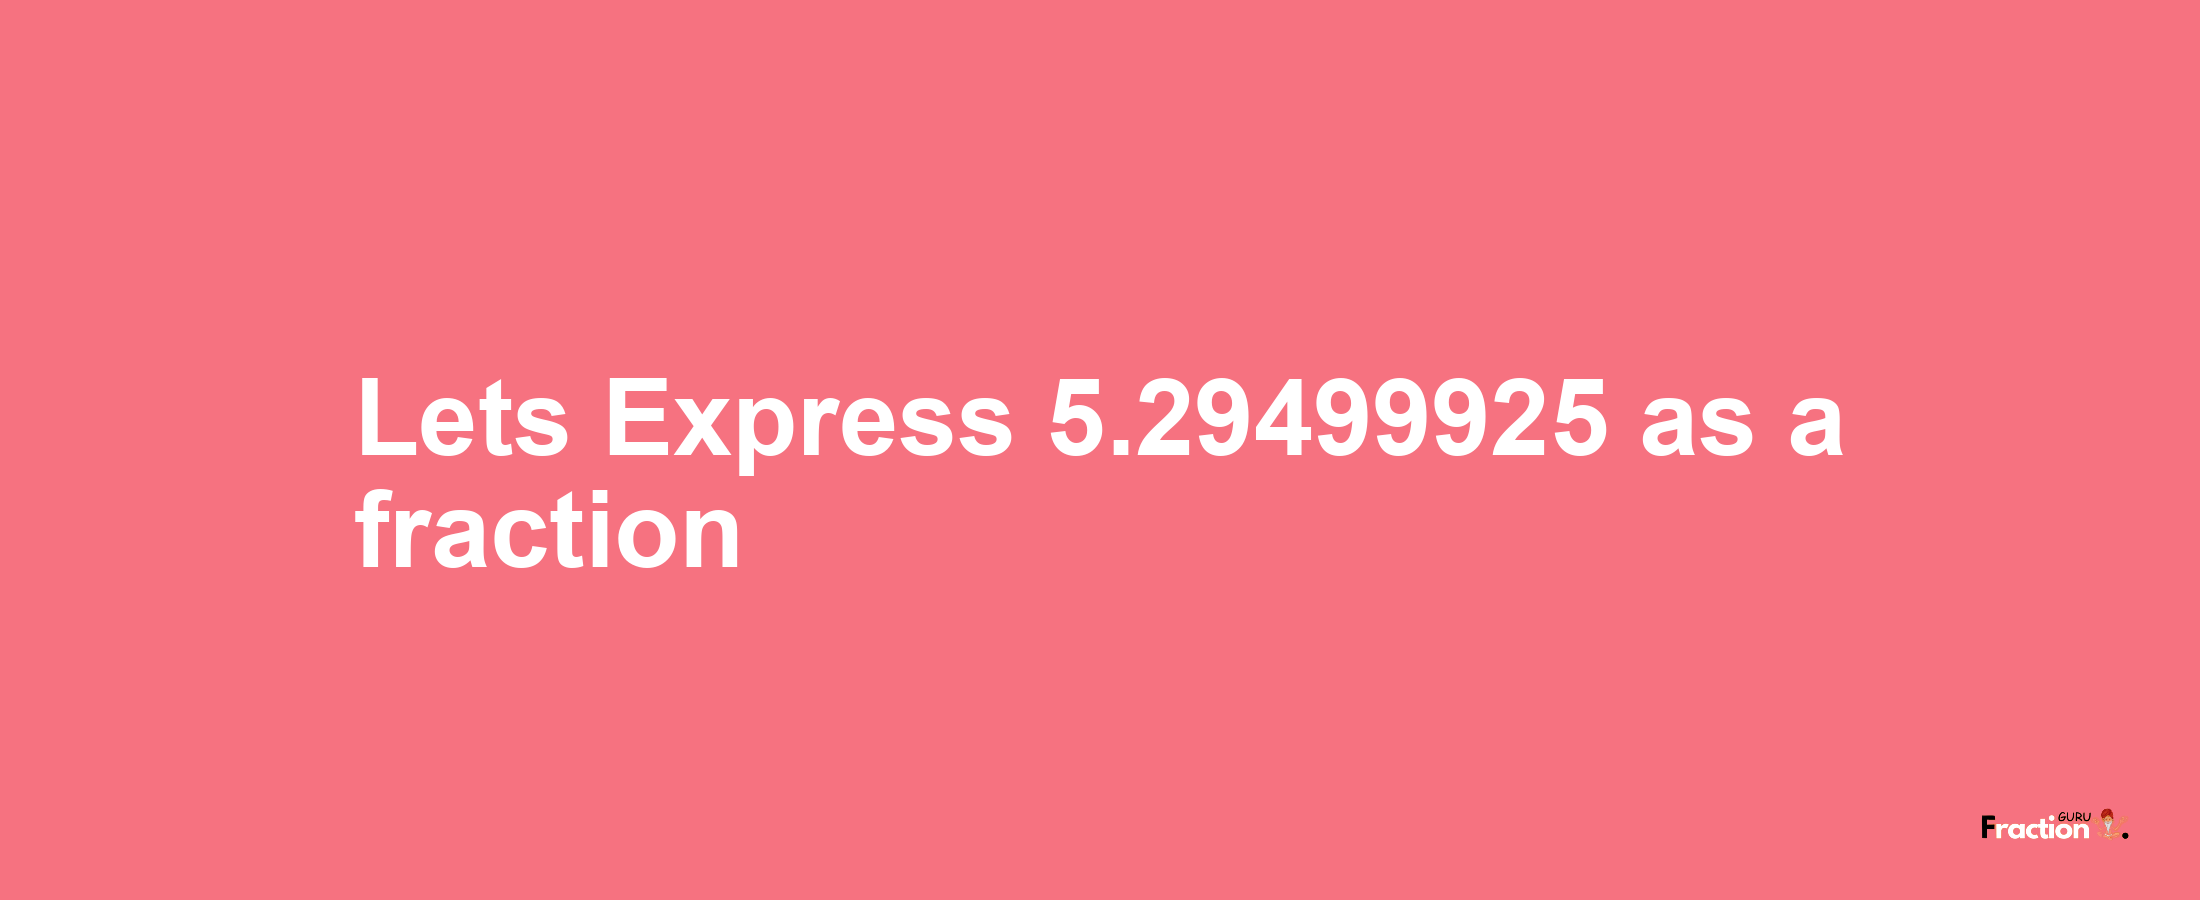 Lets Express 5.29499925 as afraction